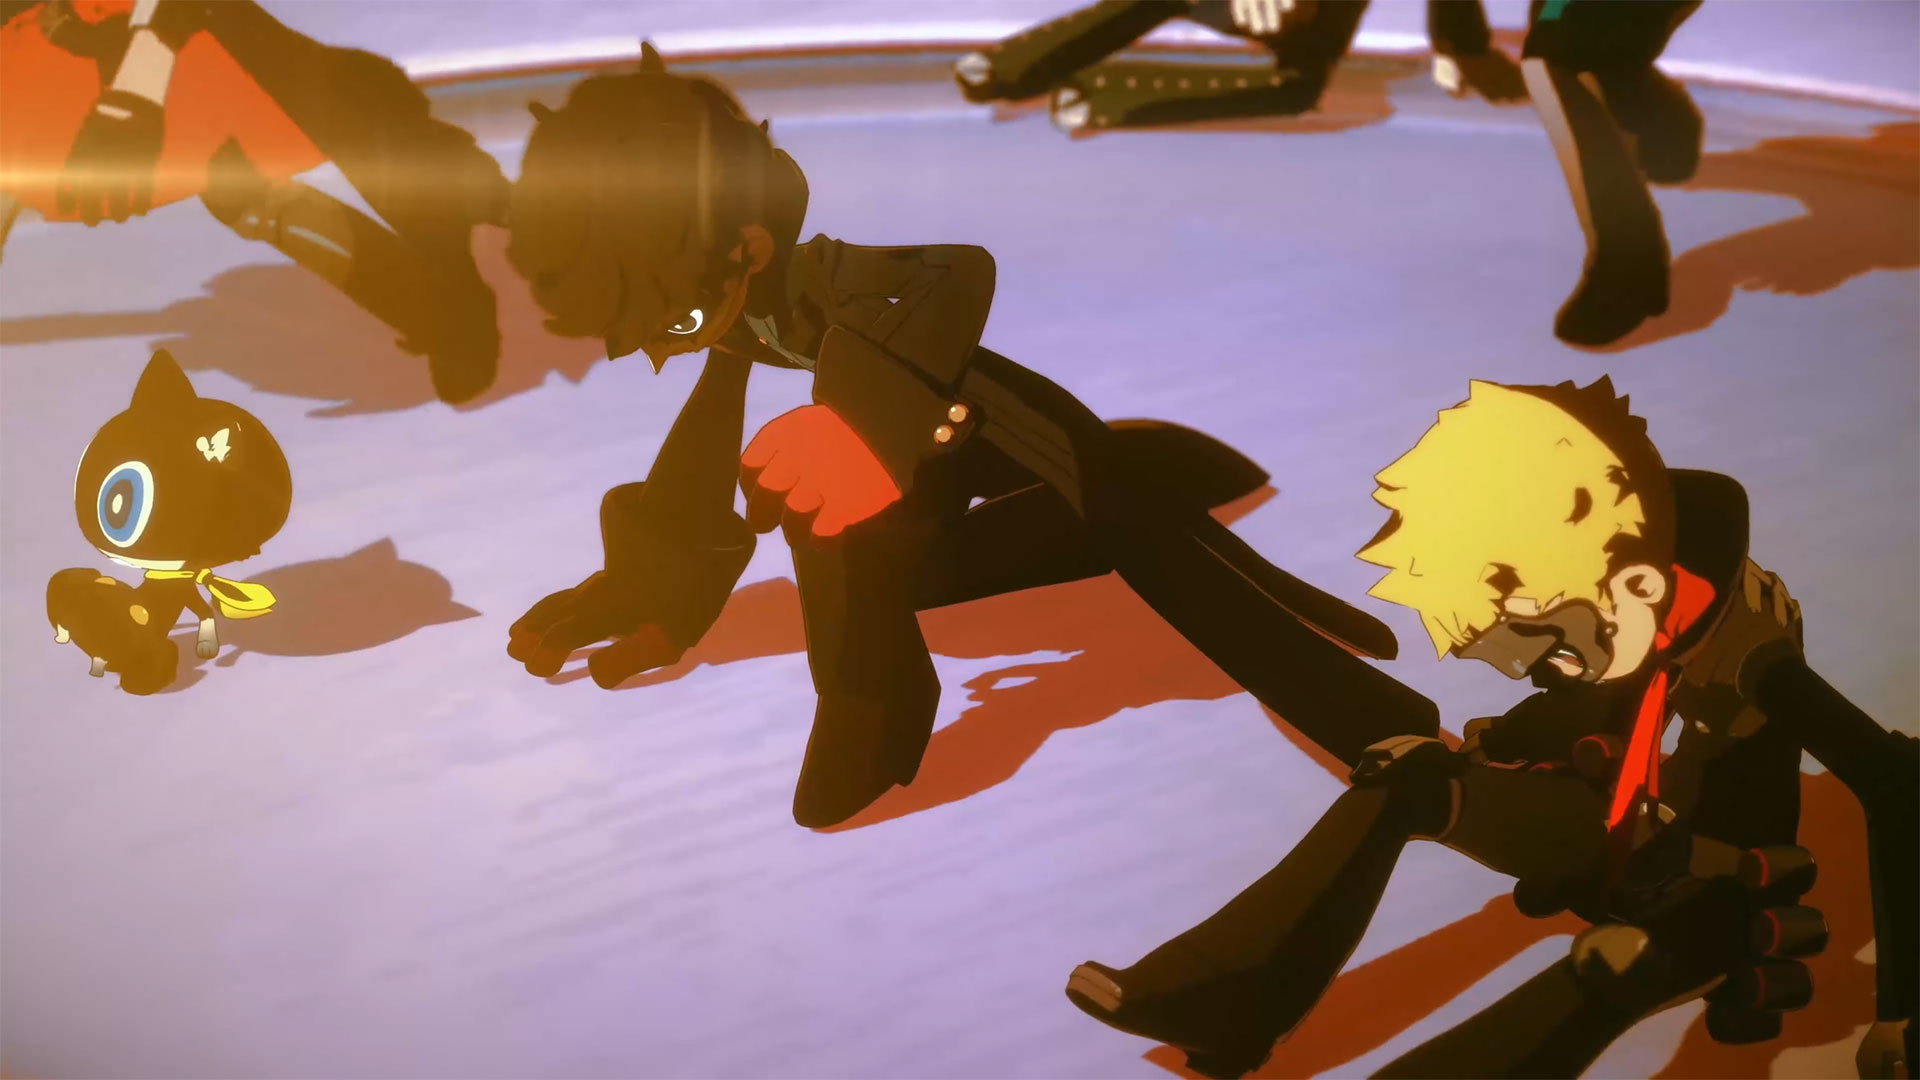 Persona 5 Tactica's second trailer reveals more about the game's story